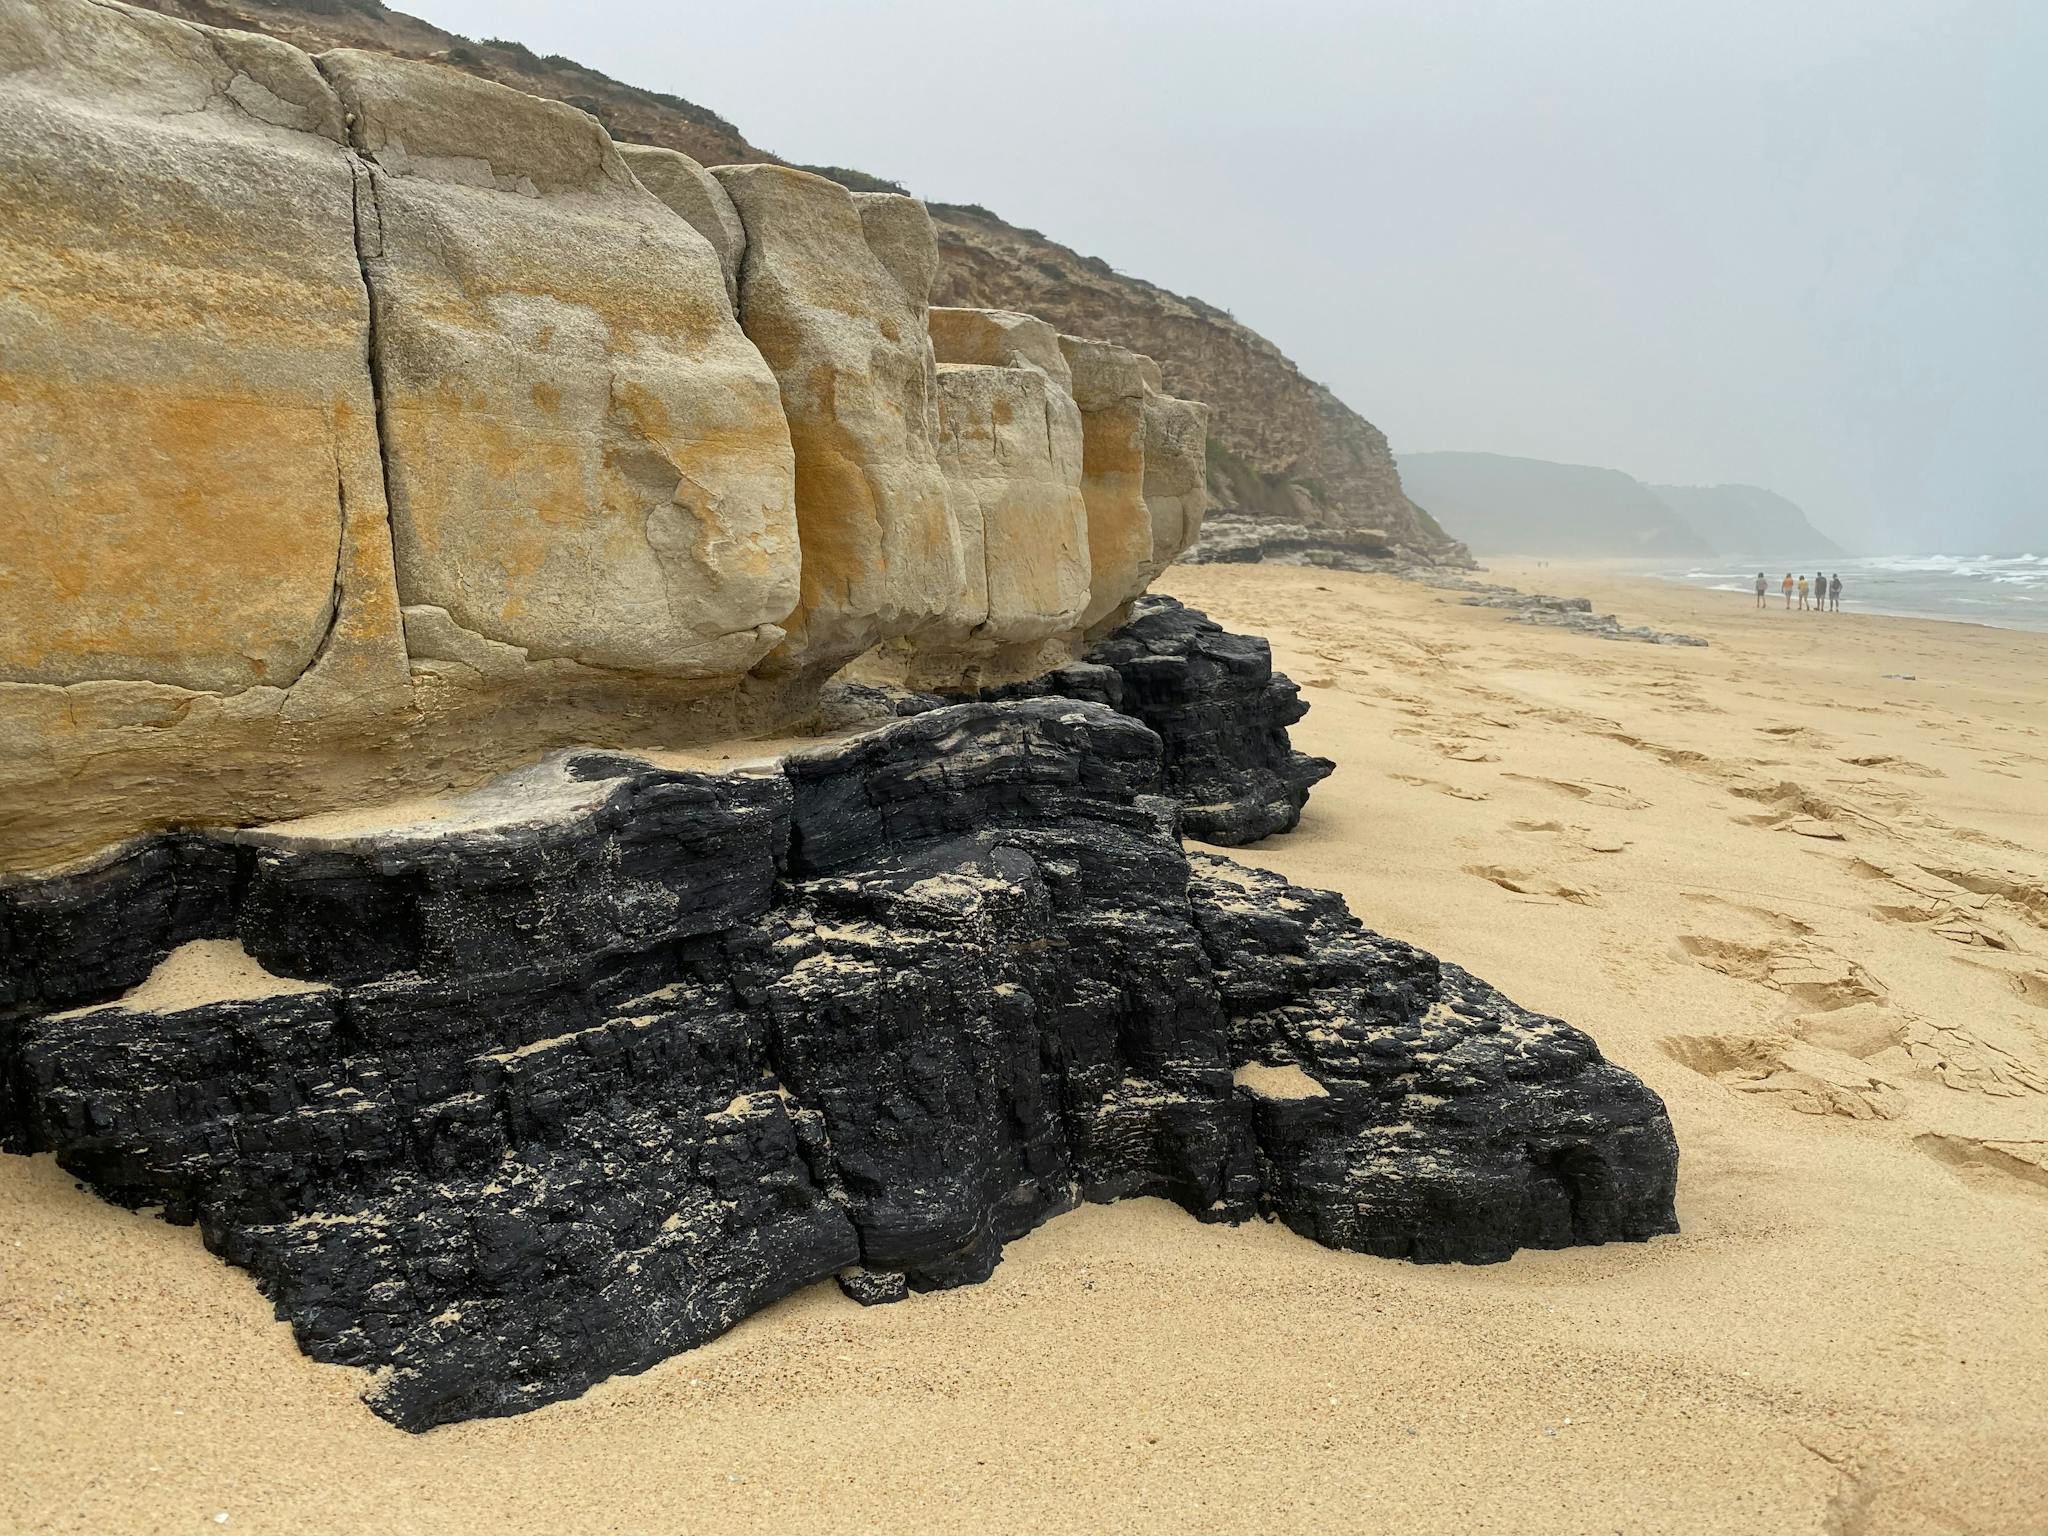 Rocks and coal exposed on a beach